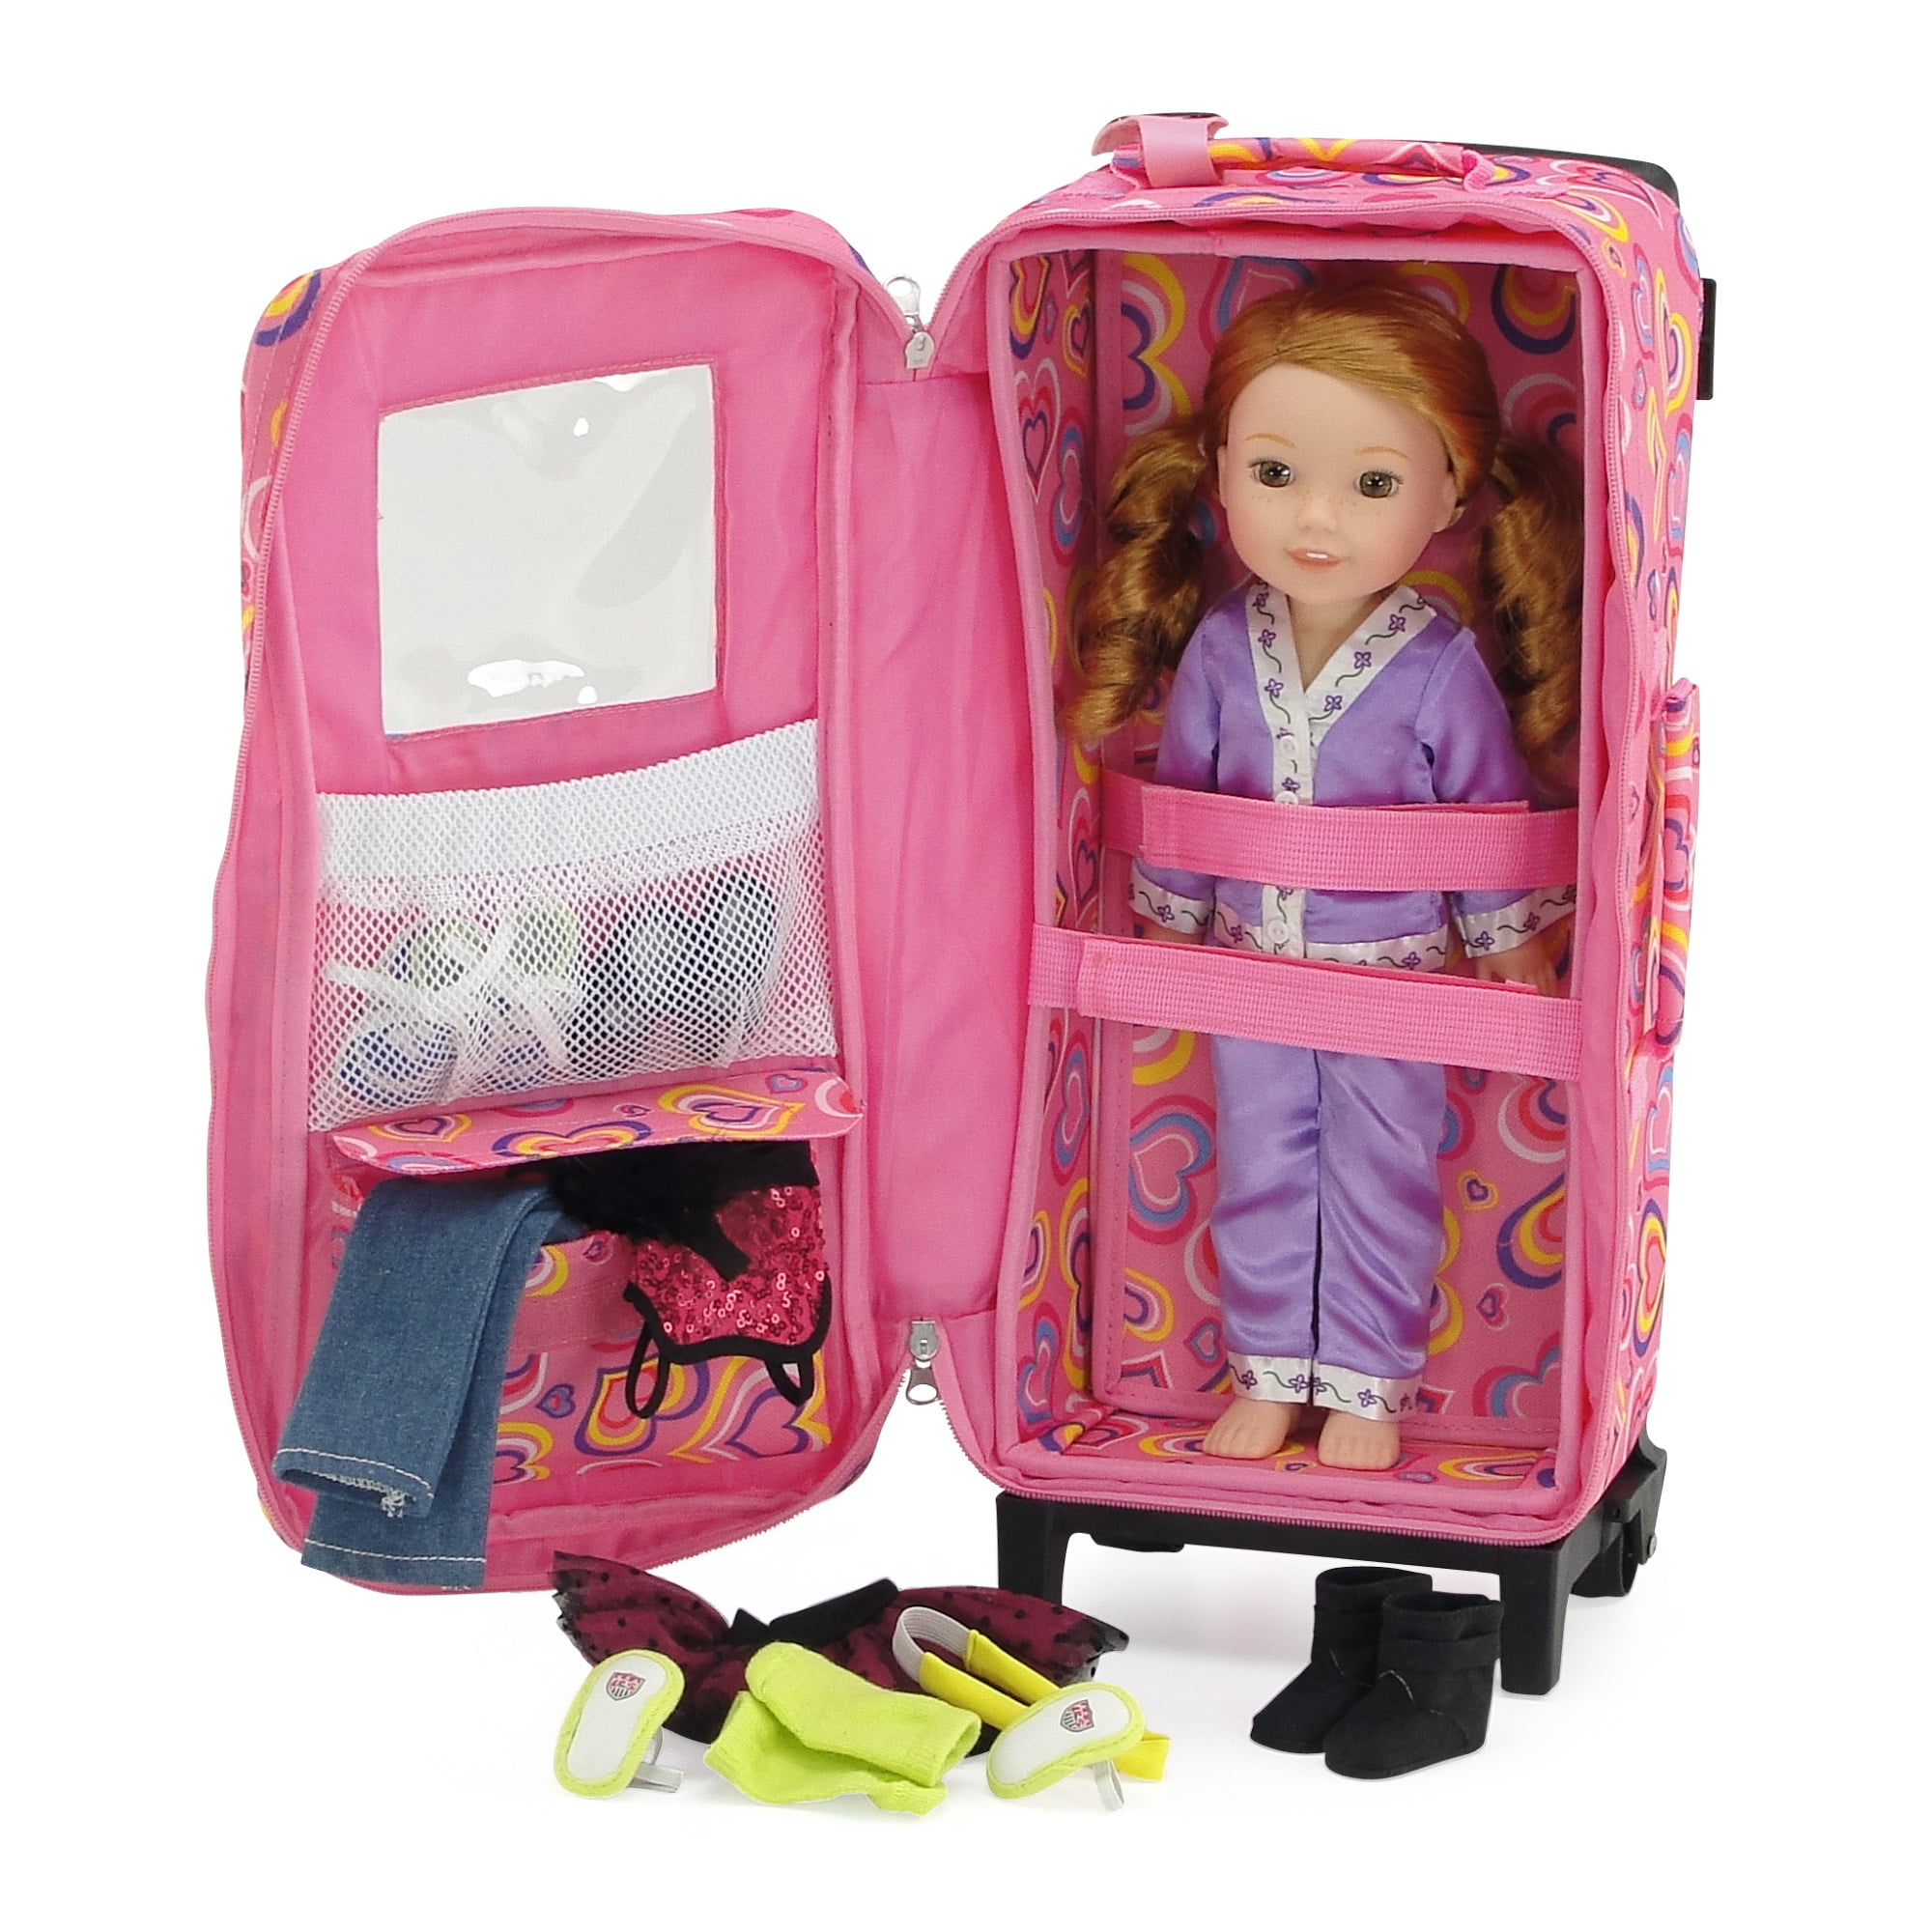 18 Inch Doll Accessories - Windowed Travel Doll Carrier/Bed with Accessories  - fits American Girl ® Dolls